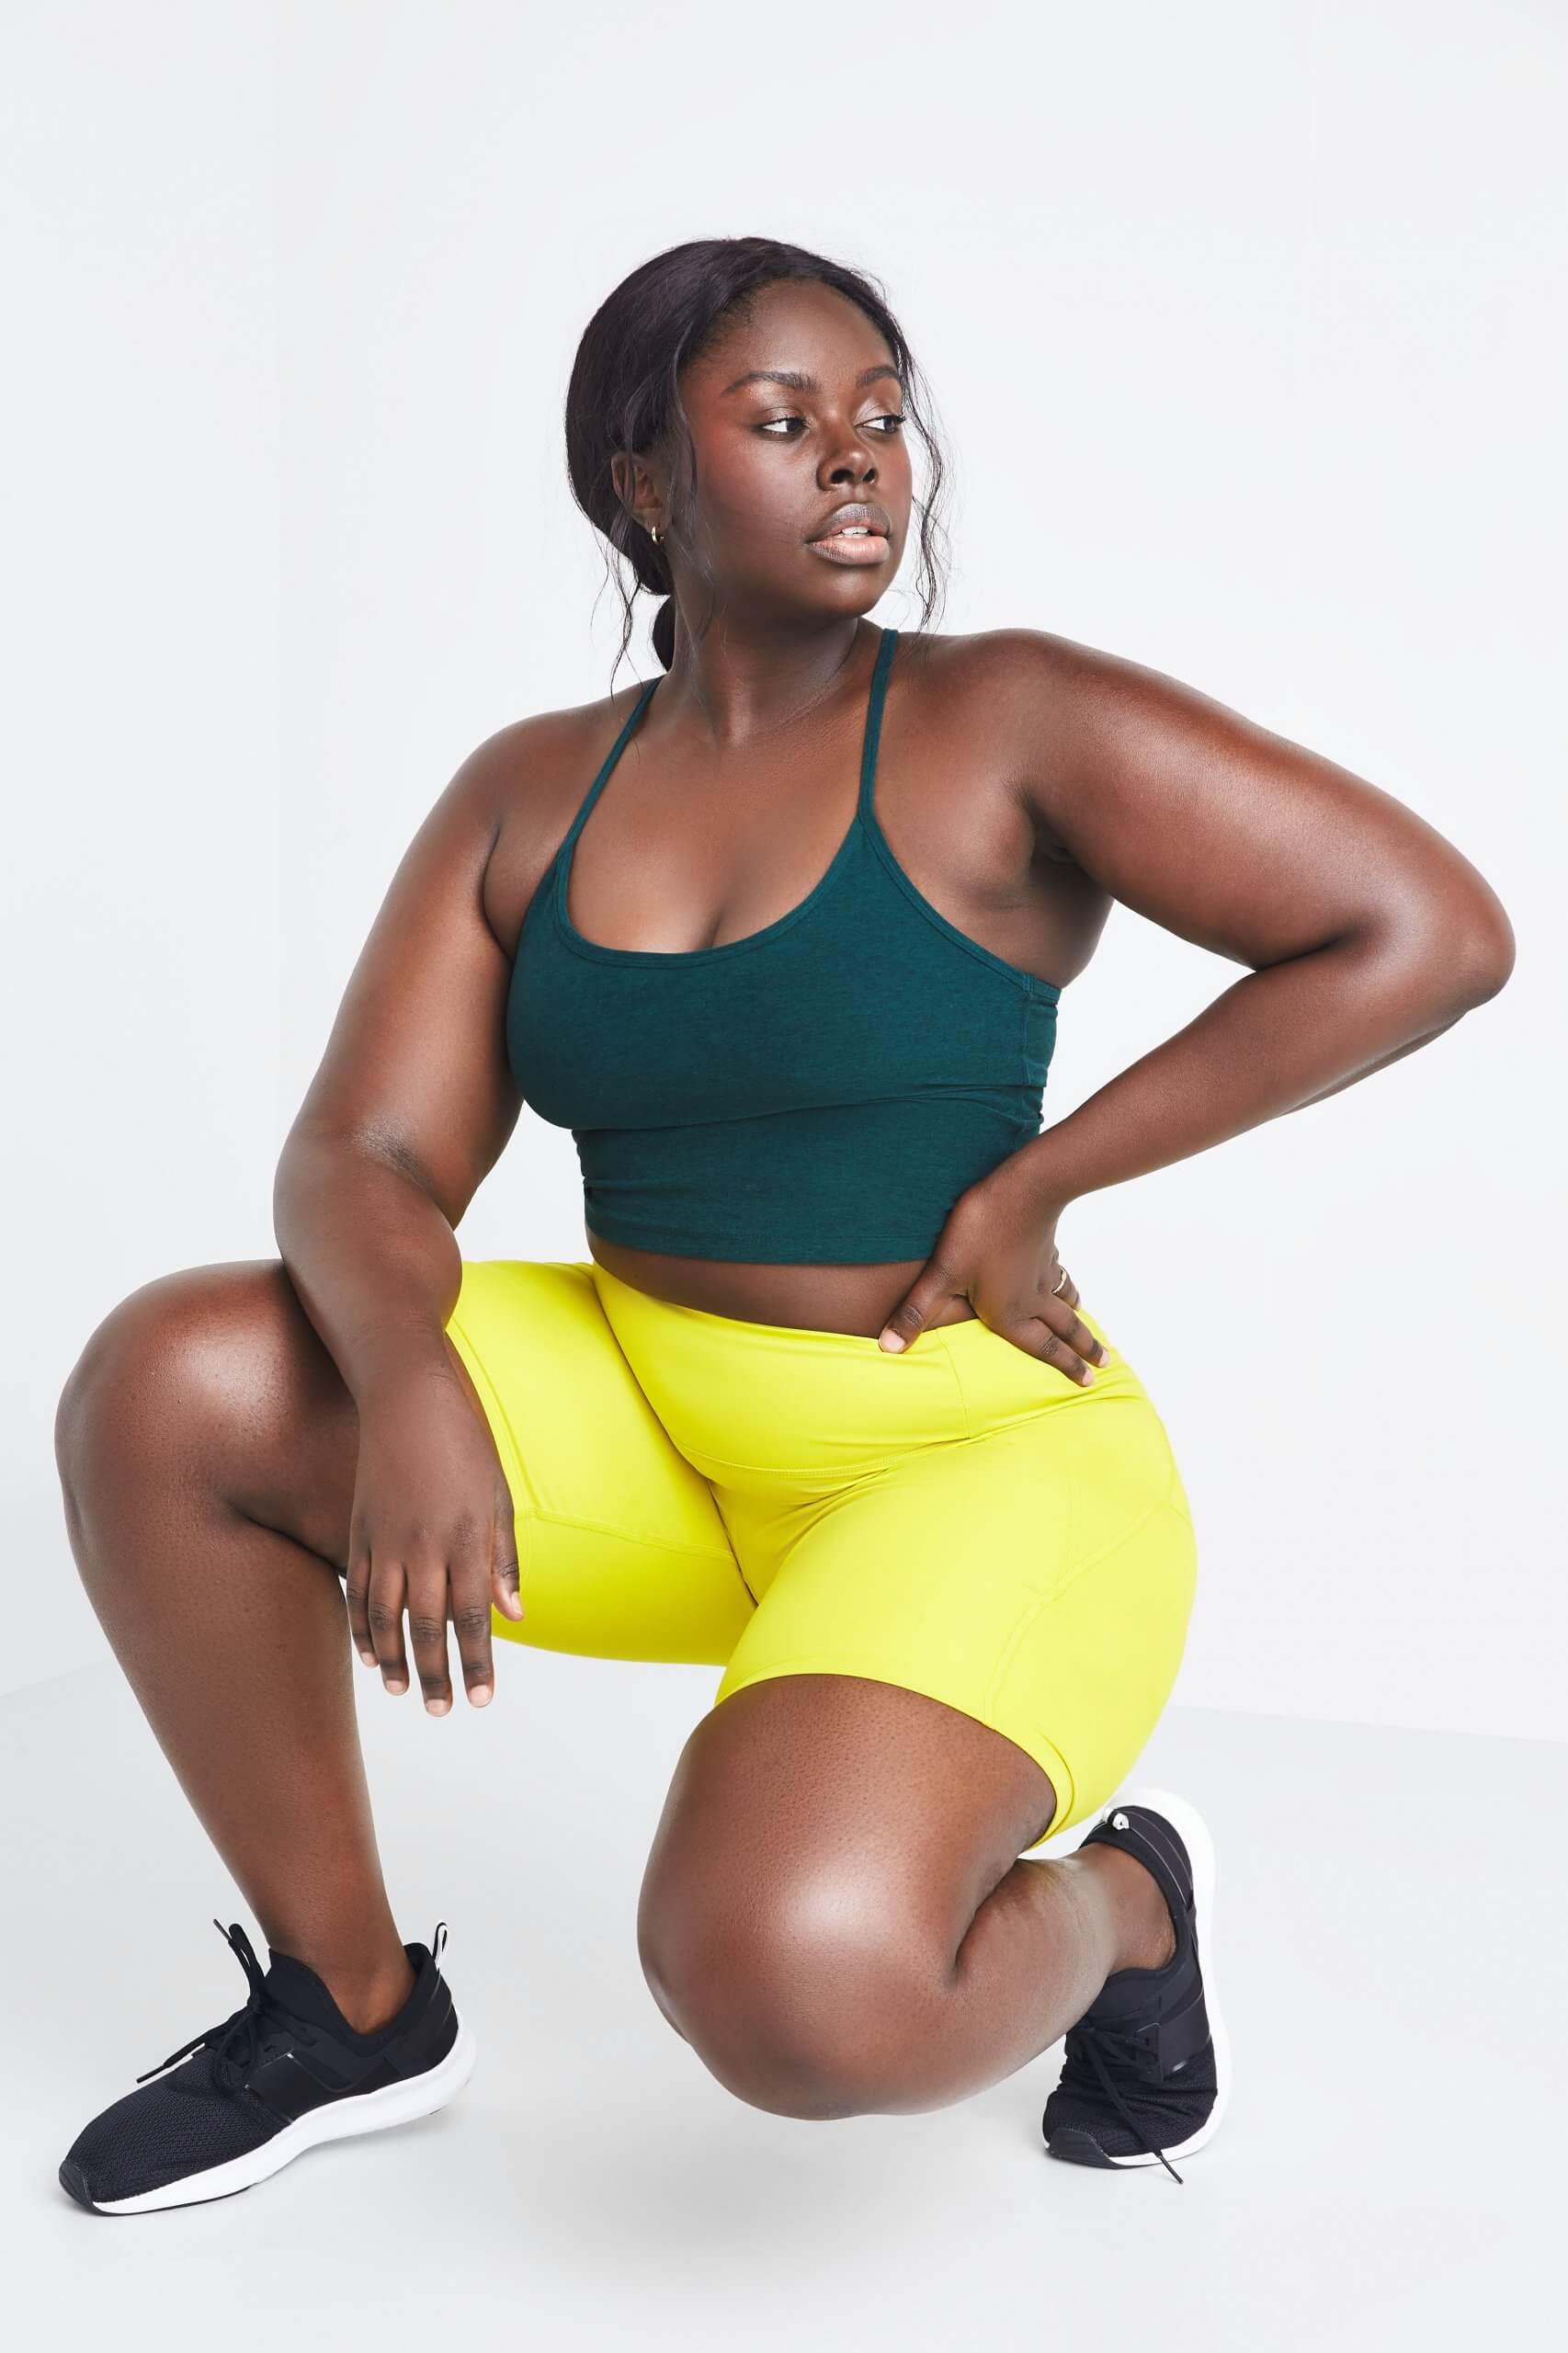 Why We Should Keep Plus Size